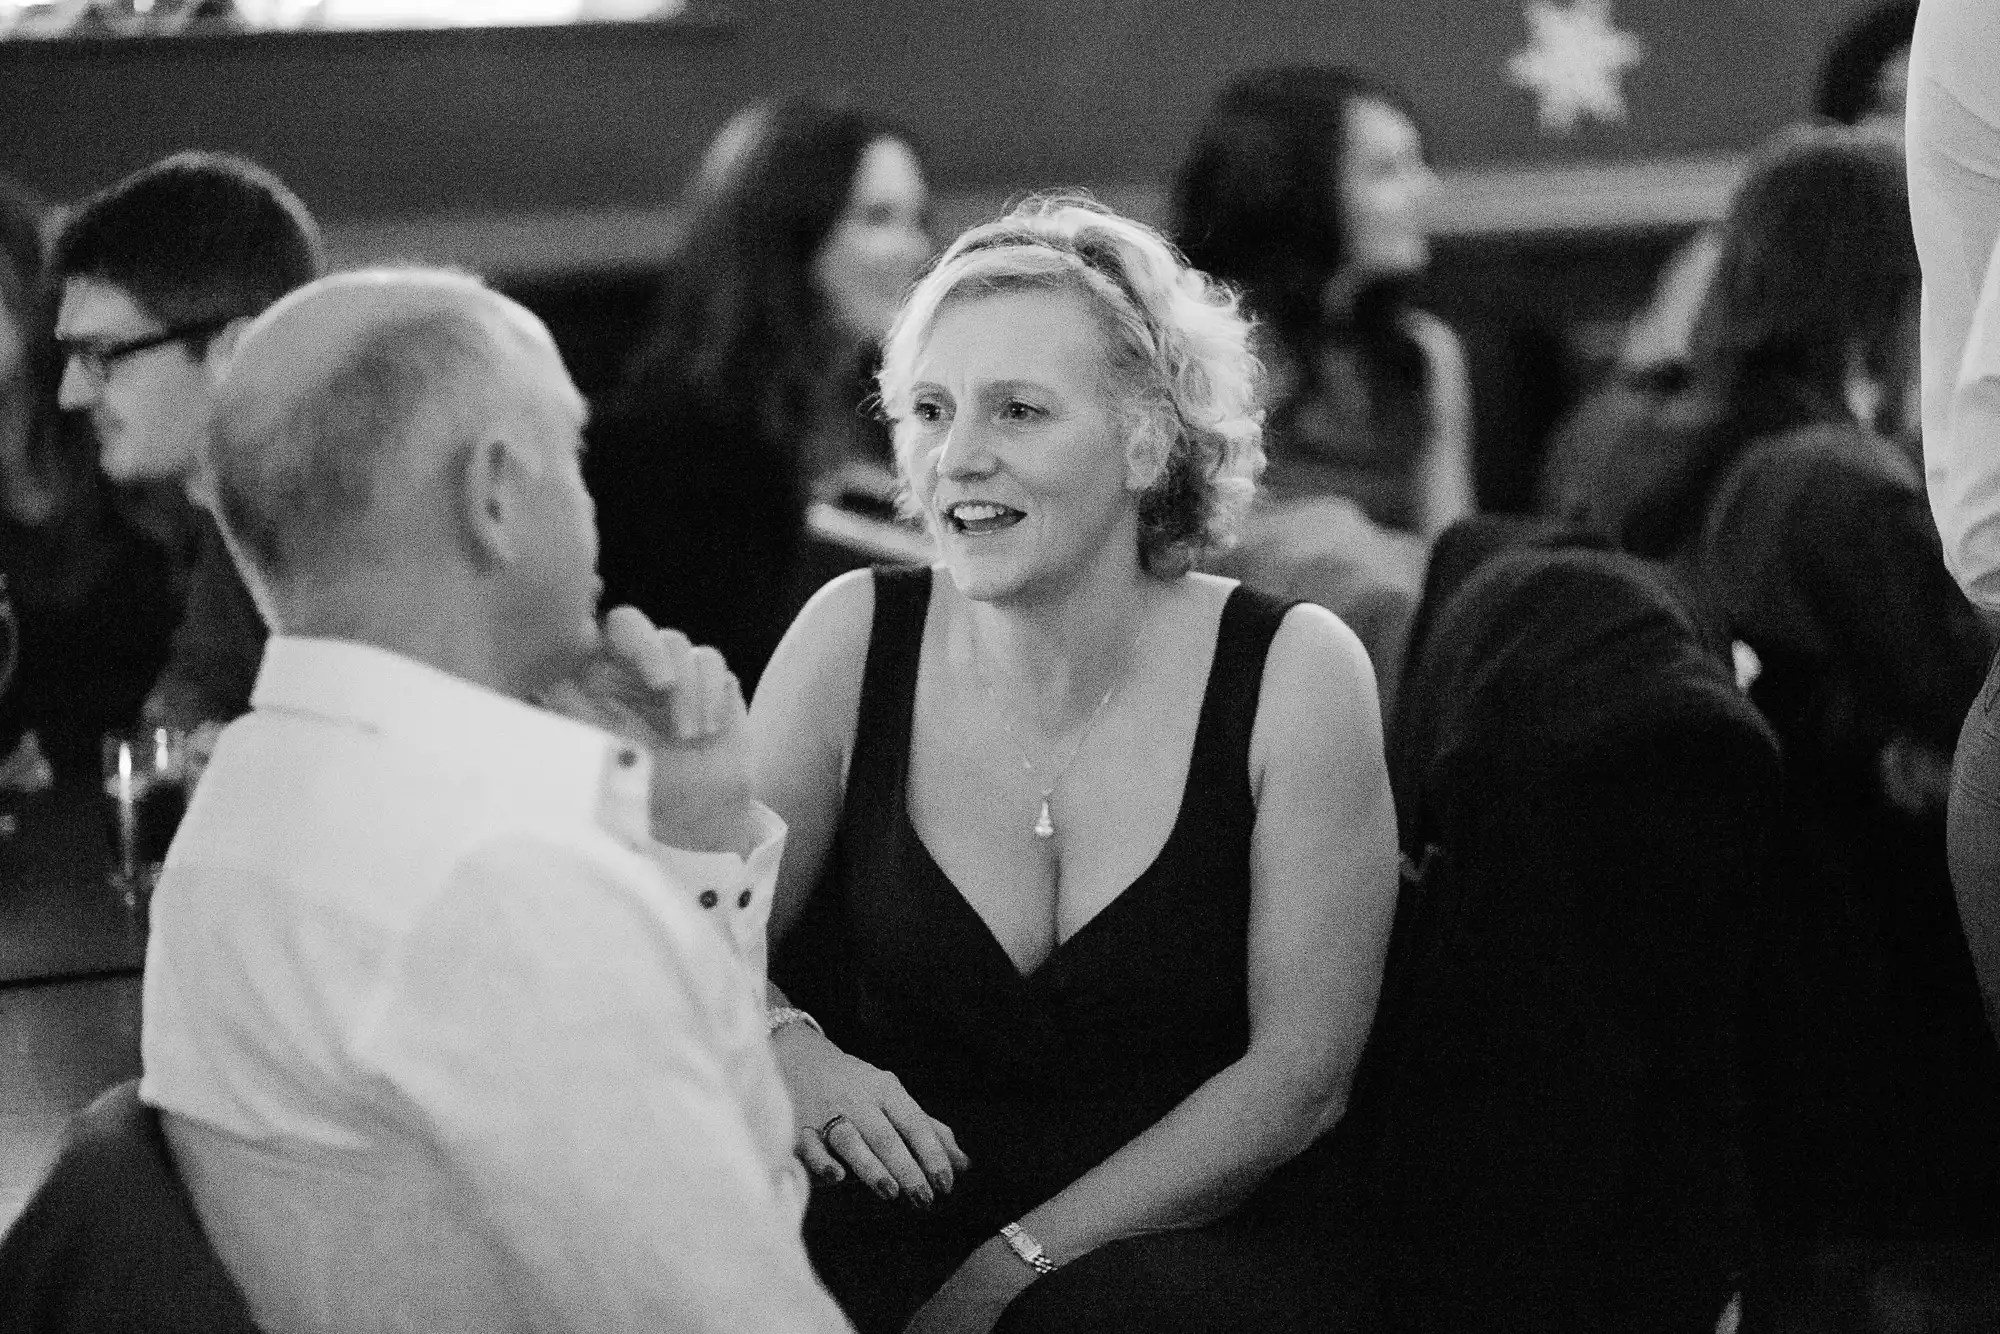 A woman in a black dress converses with a man at a social gathering, both seated, in a black and white photo.